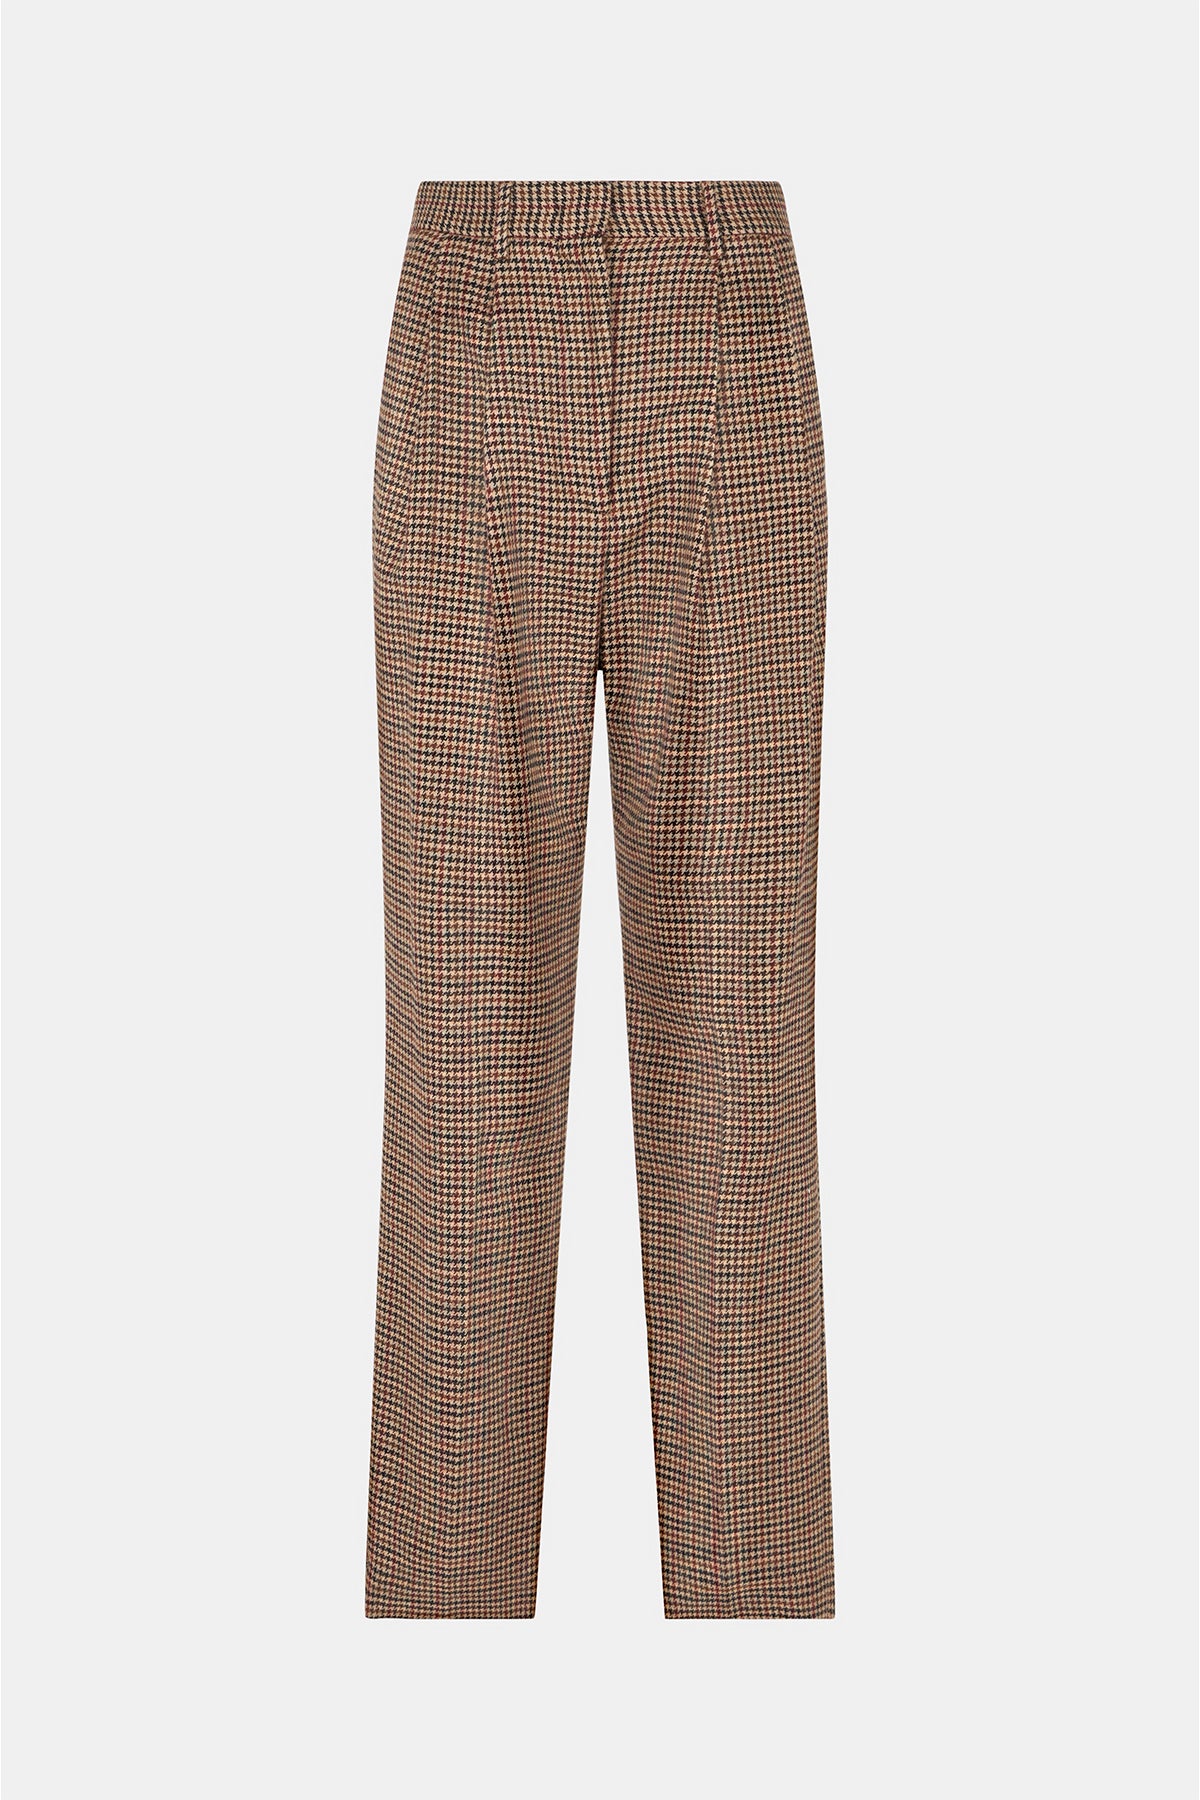 The Tailleur Trousers